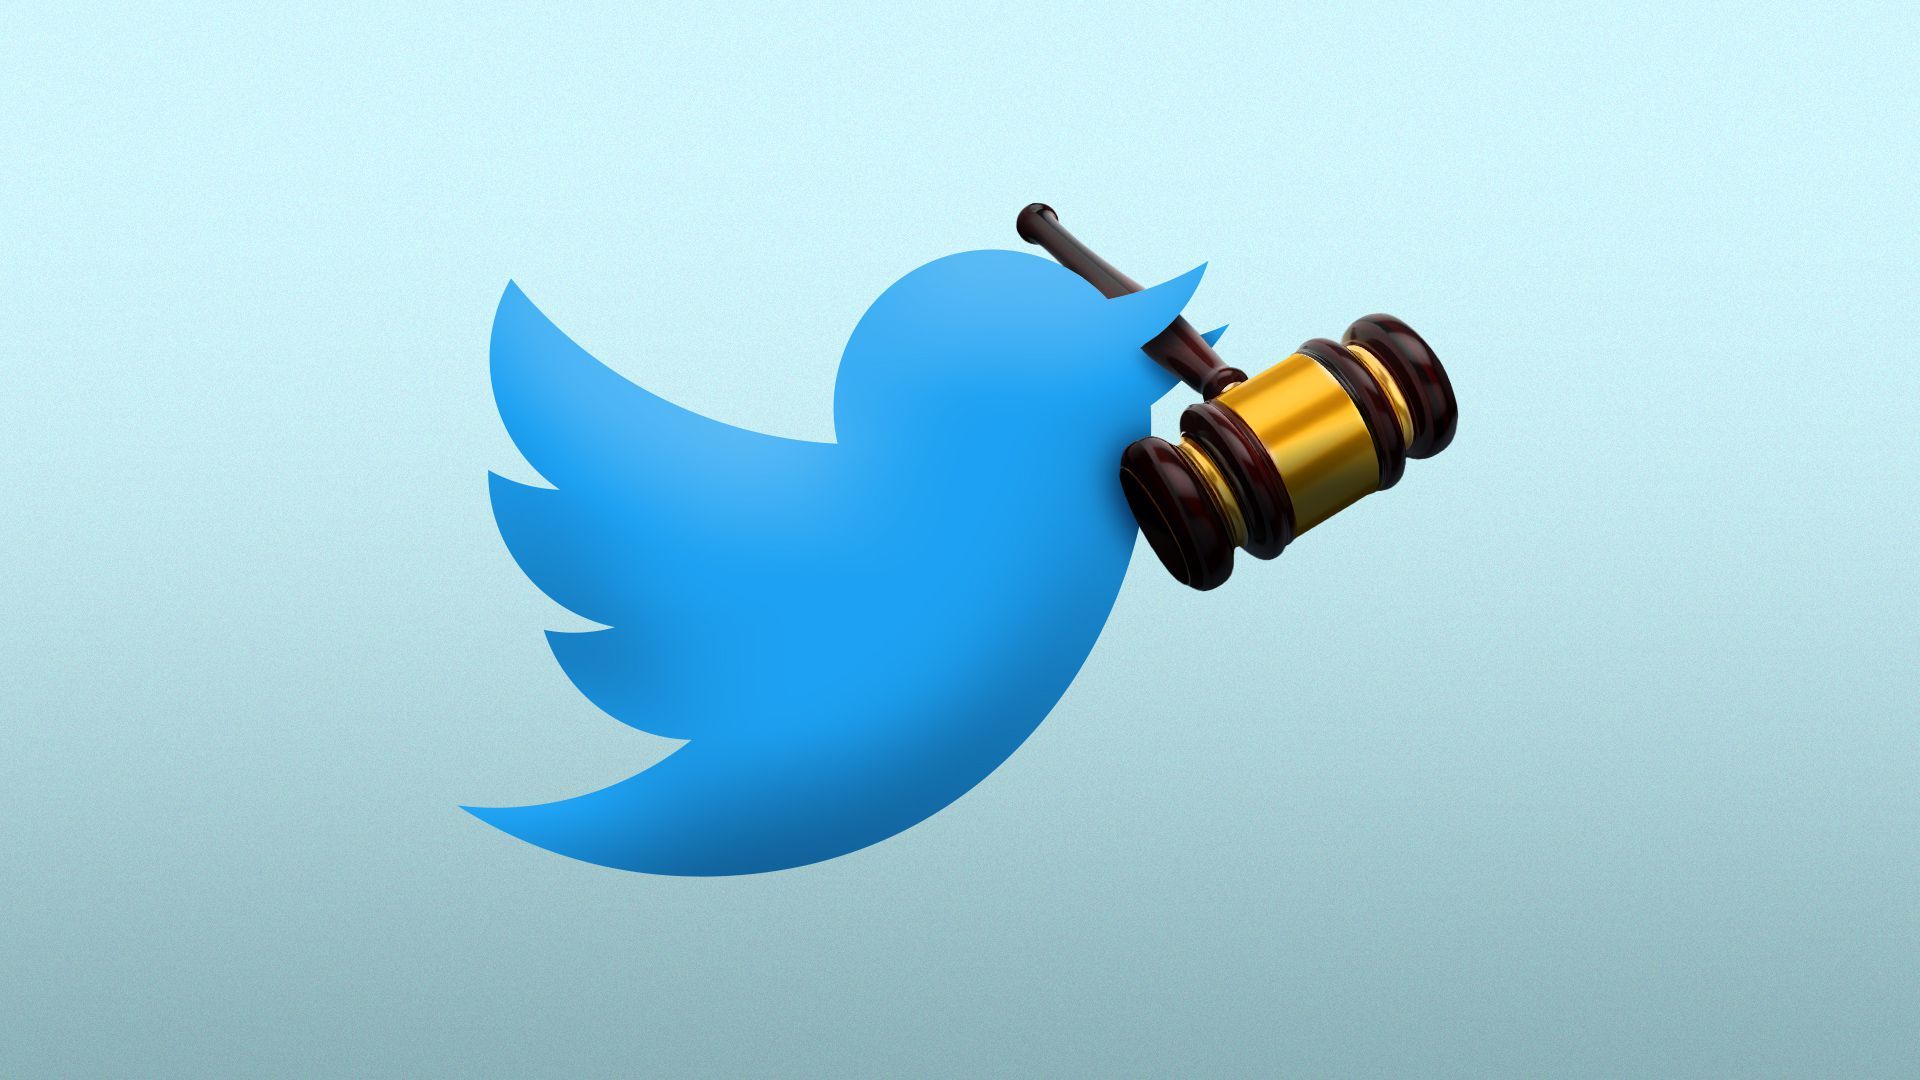 Illustration of the Twitter logo holding a gavel in its mouth.